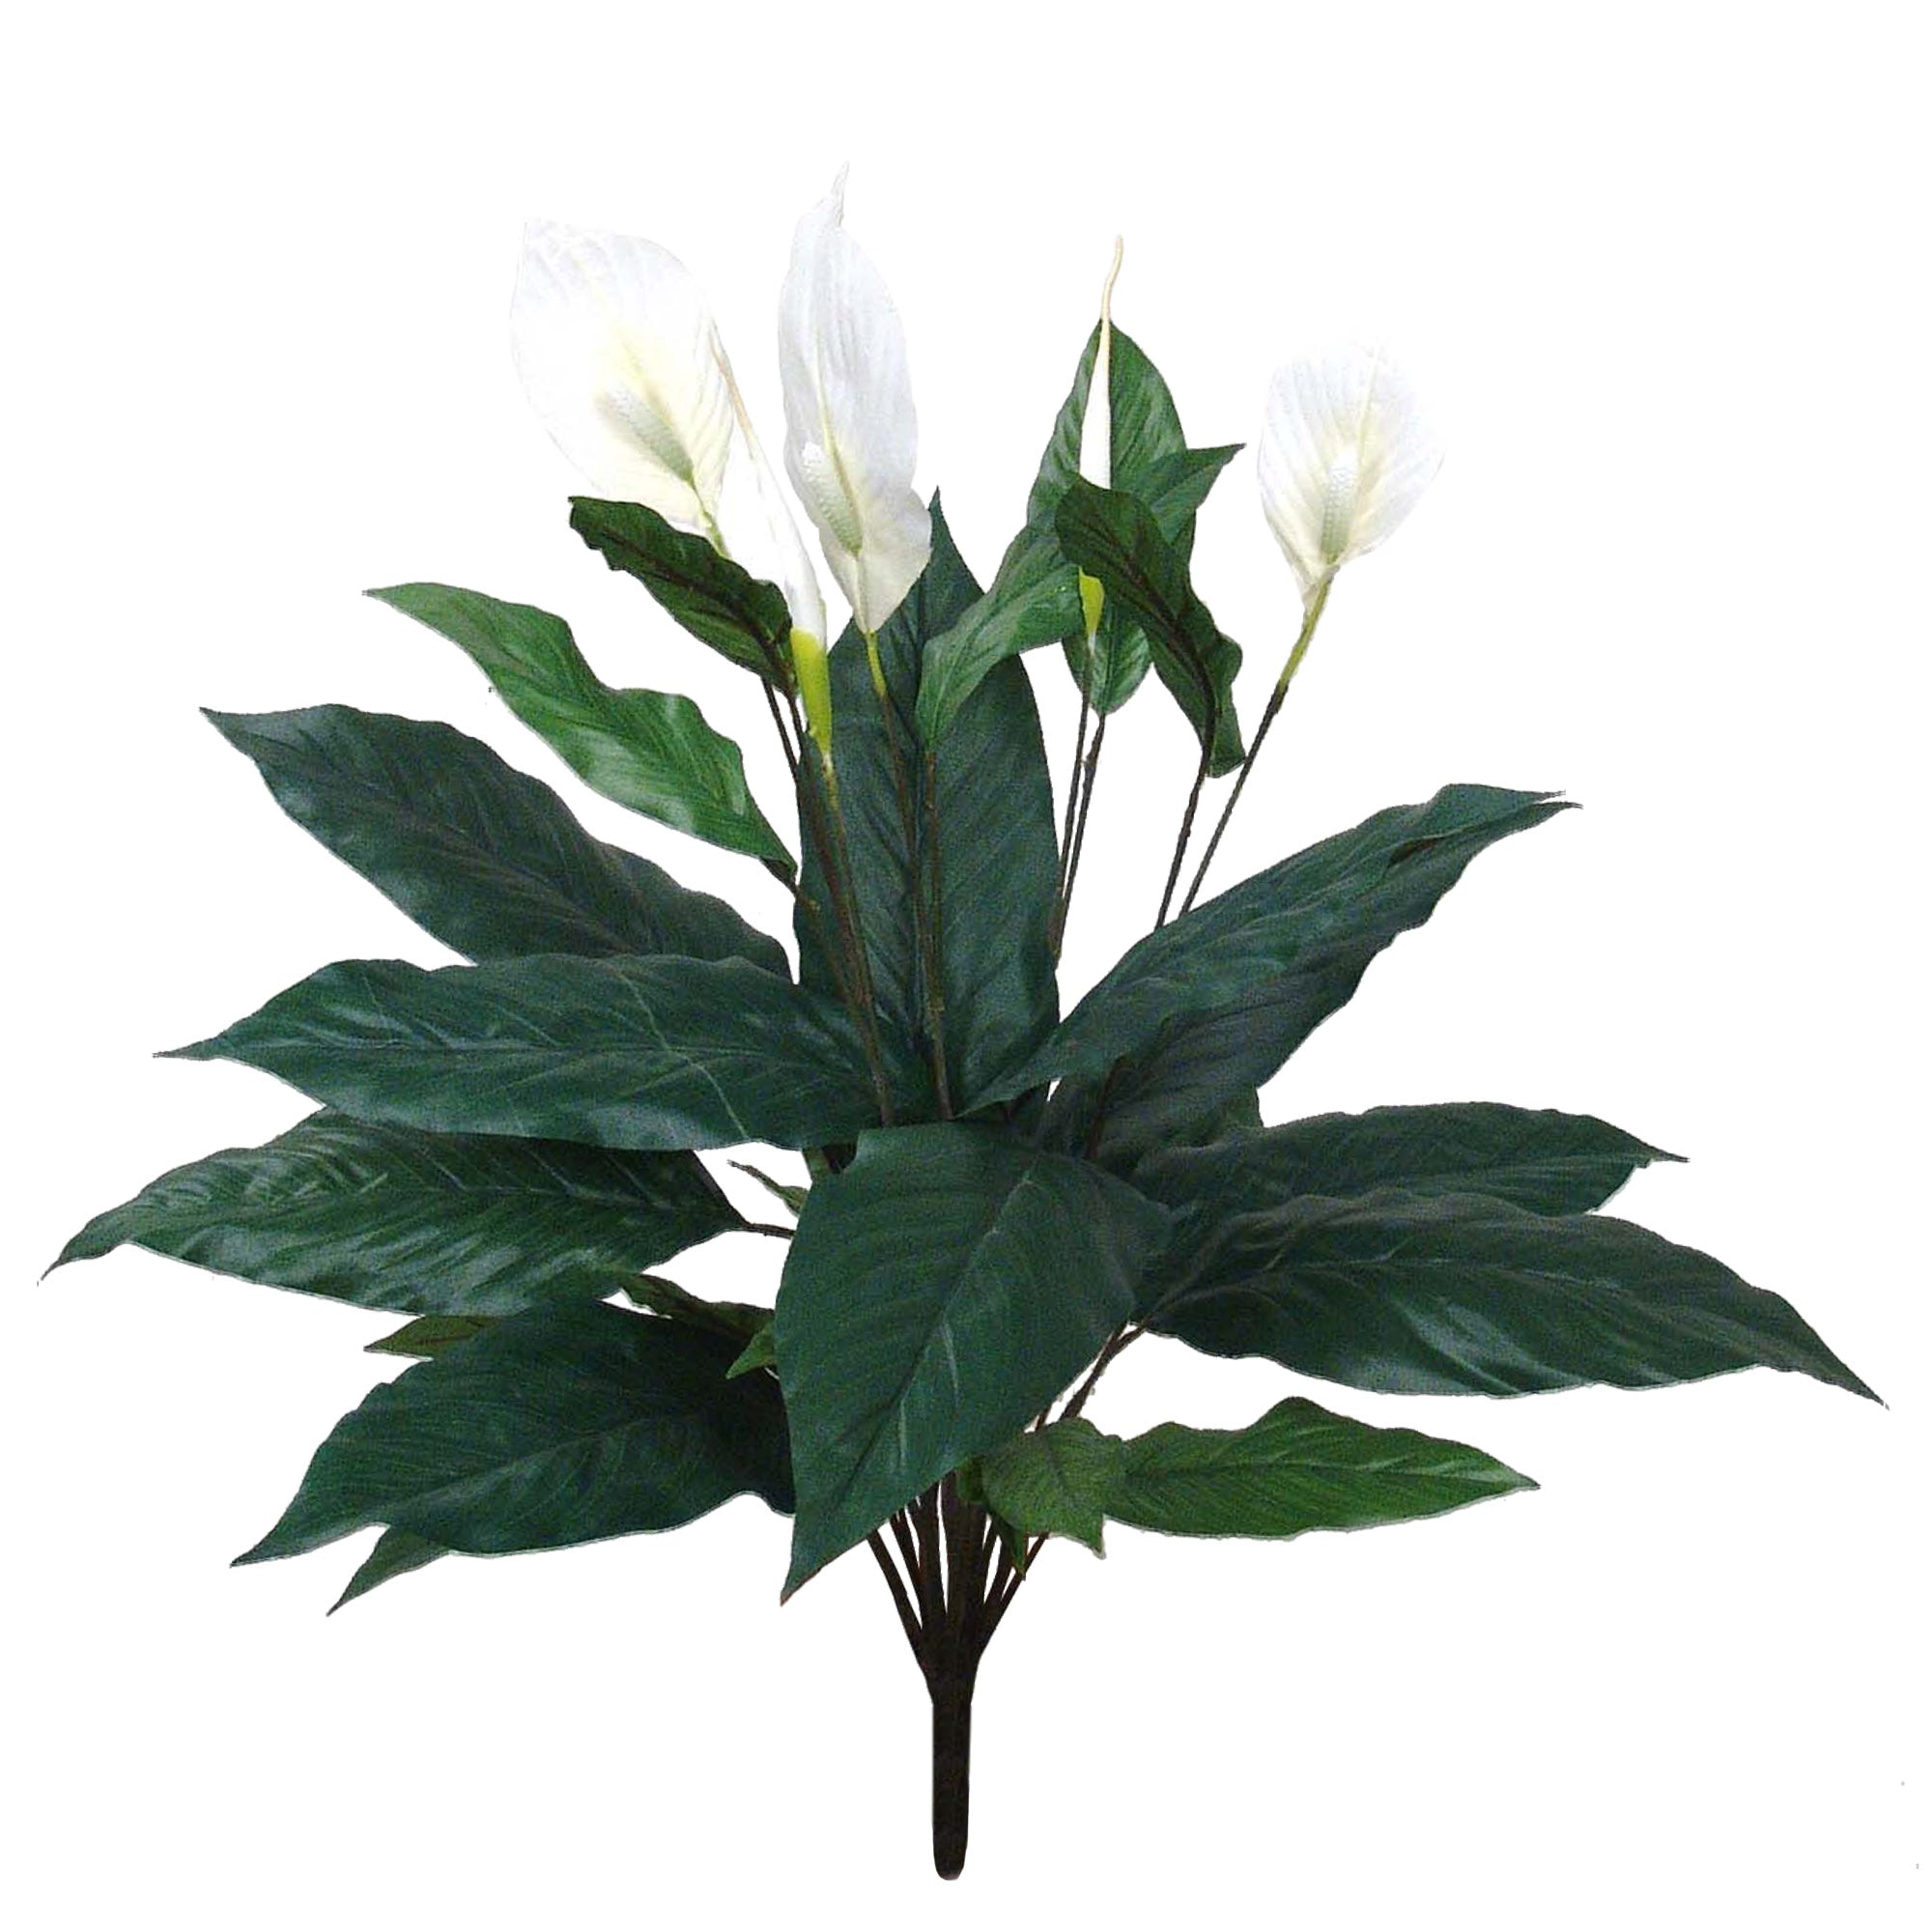 Lush 30" Spathiphyllum Plant - Realistic Greenery for Home Decor, Office, and Natural Air Purification